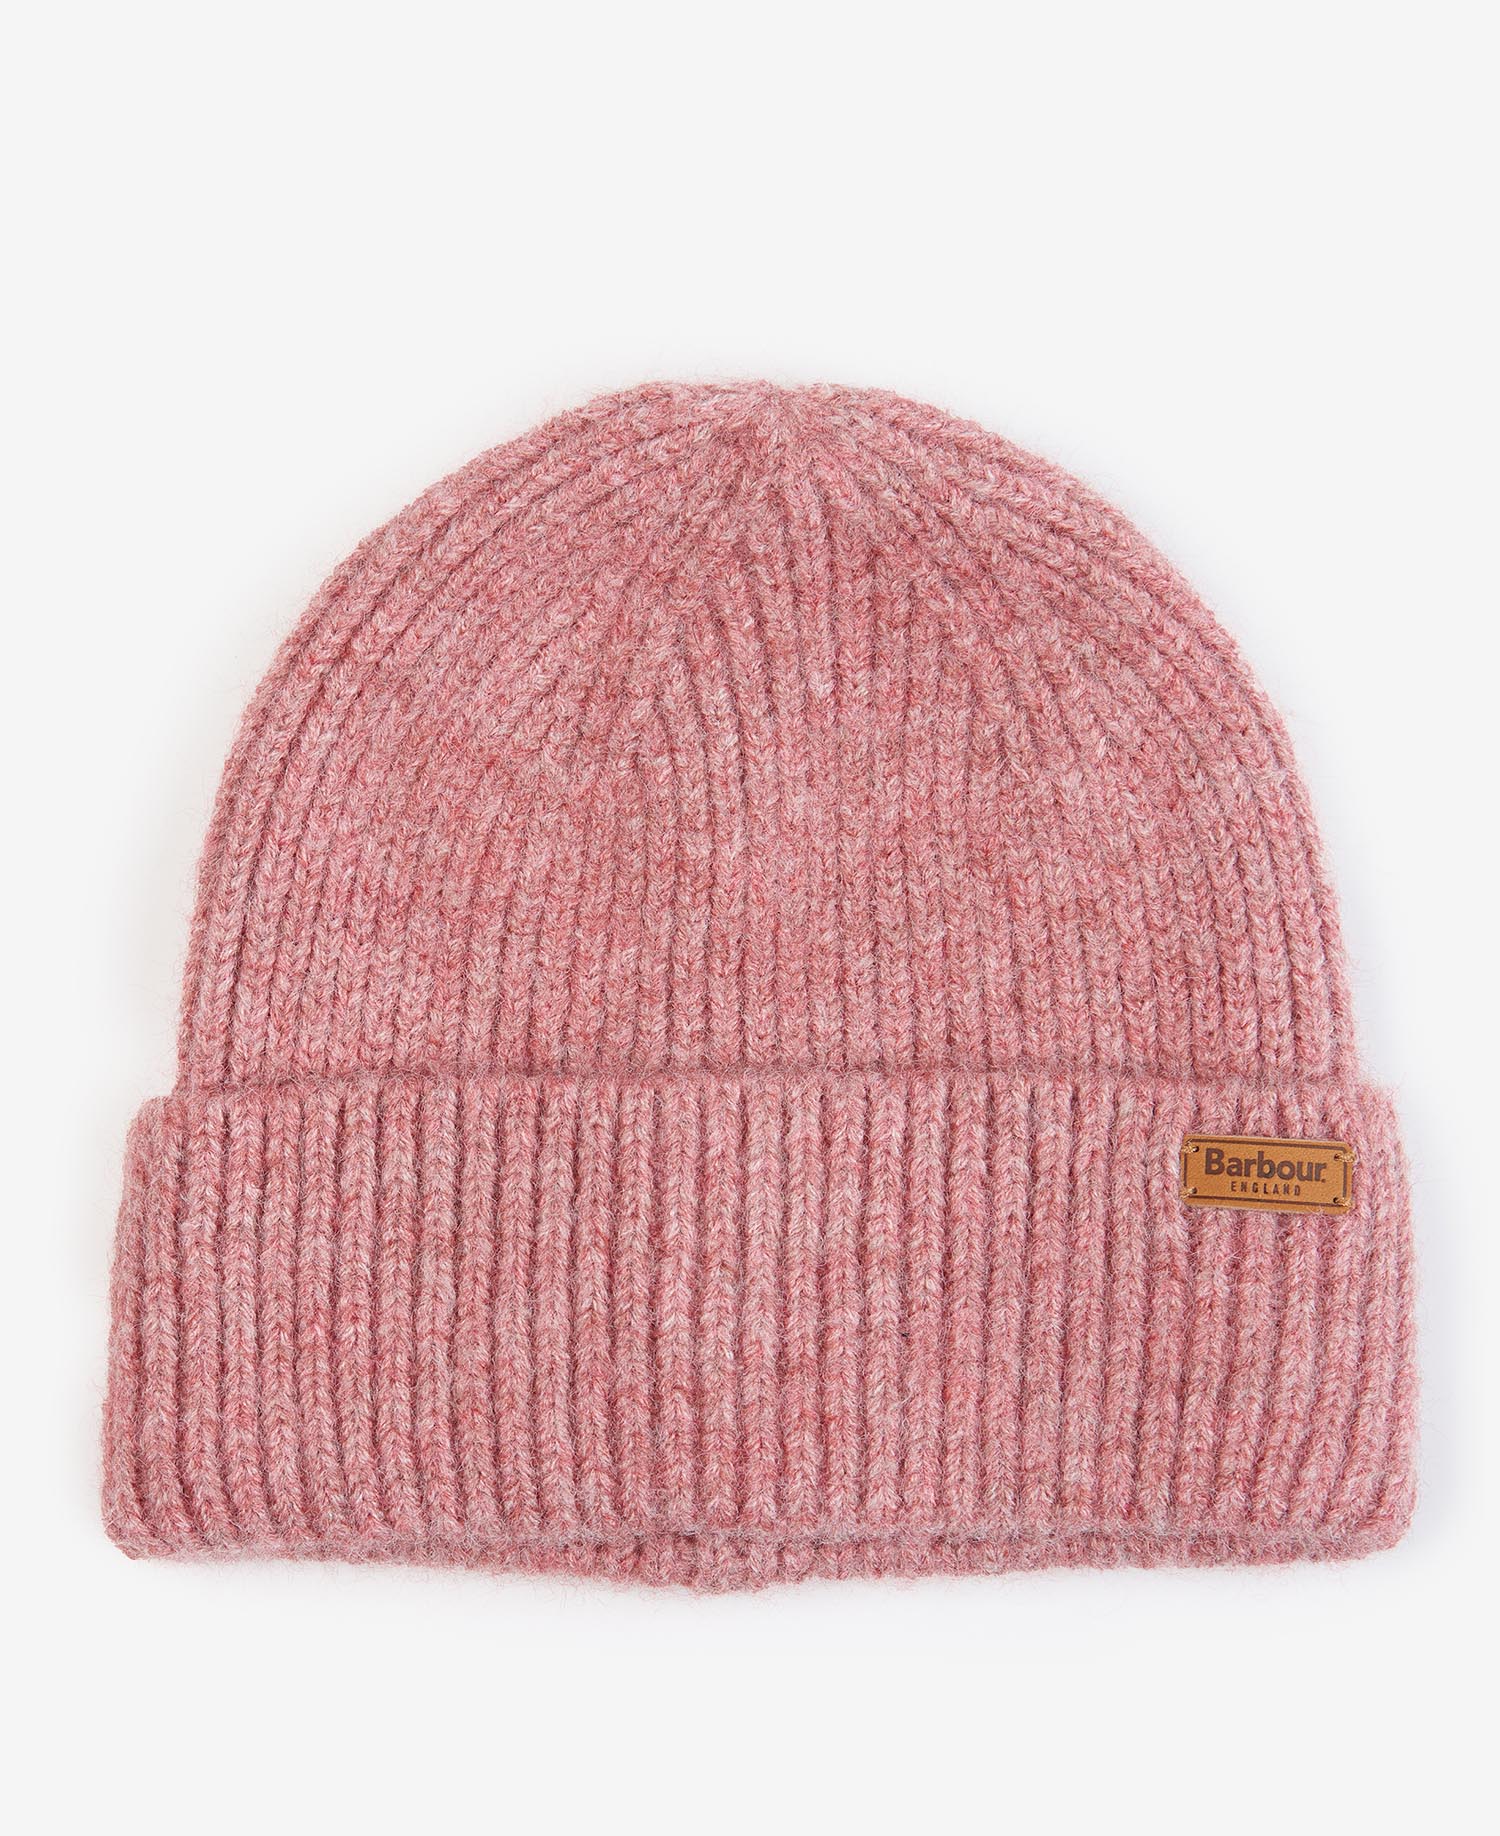 Barbour Pendle Beanie Pink